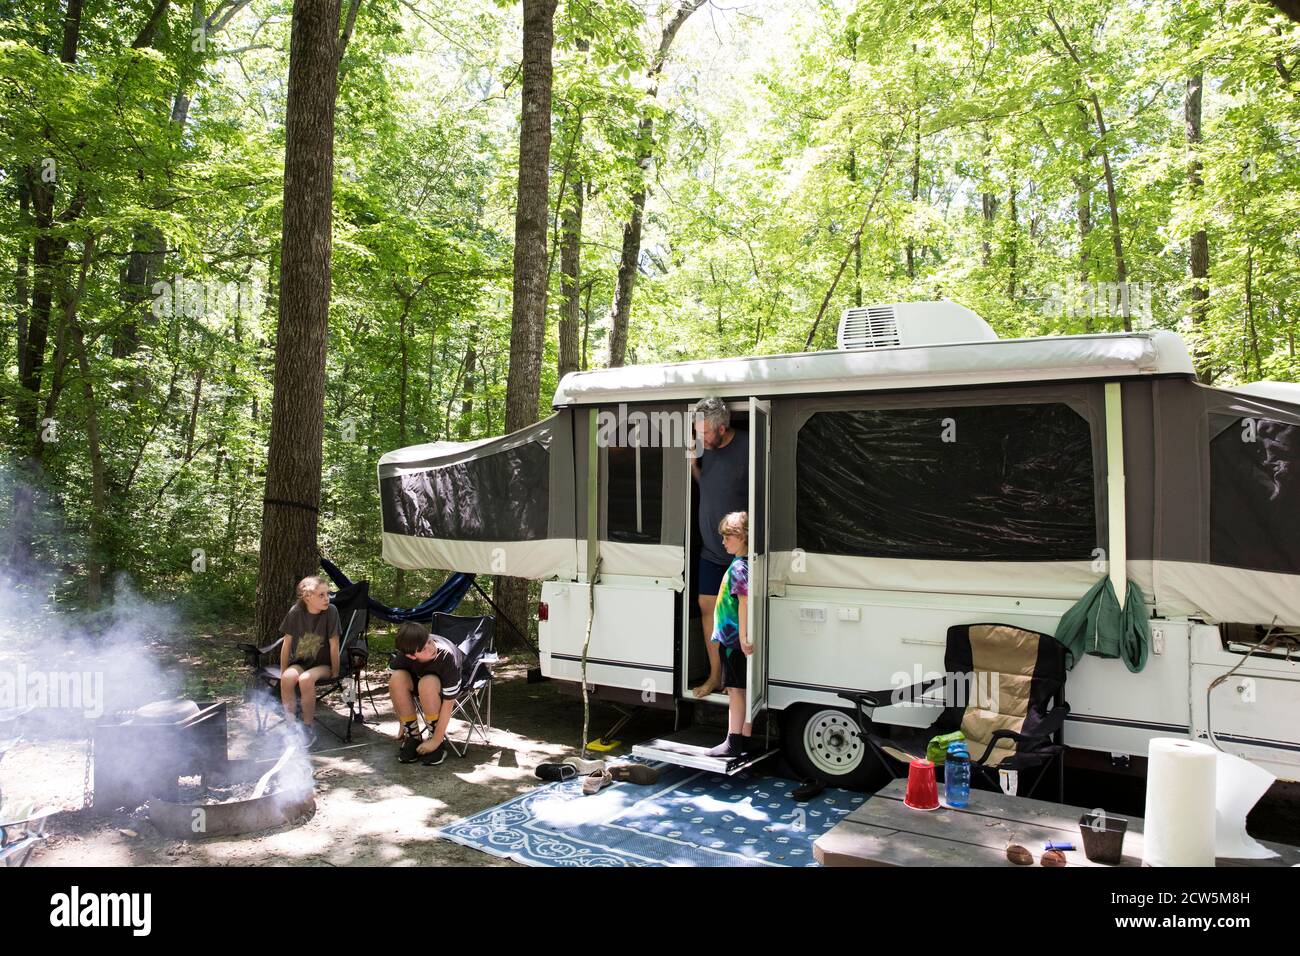 Wide View of Pop Up Camper at Campsite on Family Camping Trip Stock Photo